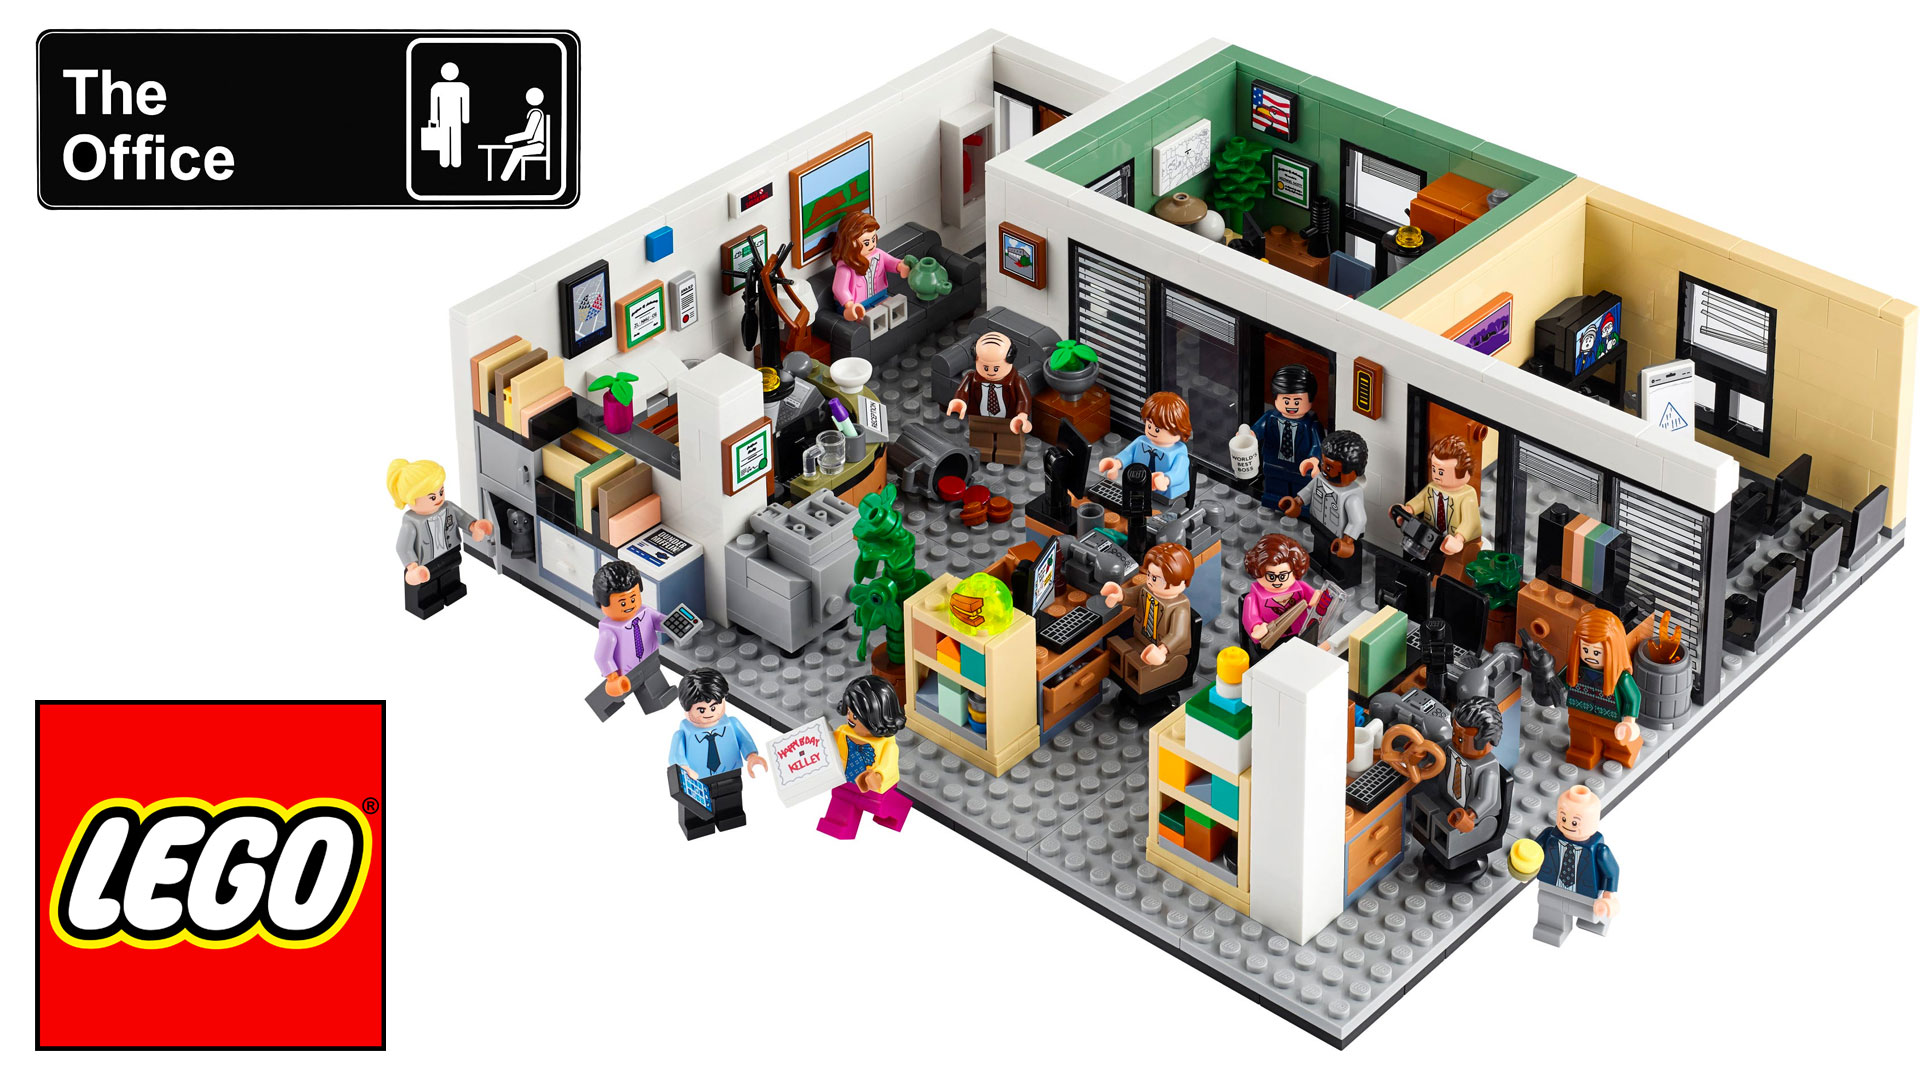 Step into The Office: Recreate Dunder Mifflin’s Iconic Scranton Workplace with LEGO® Ideas Set (21336)